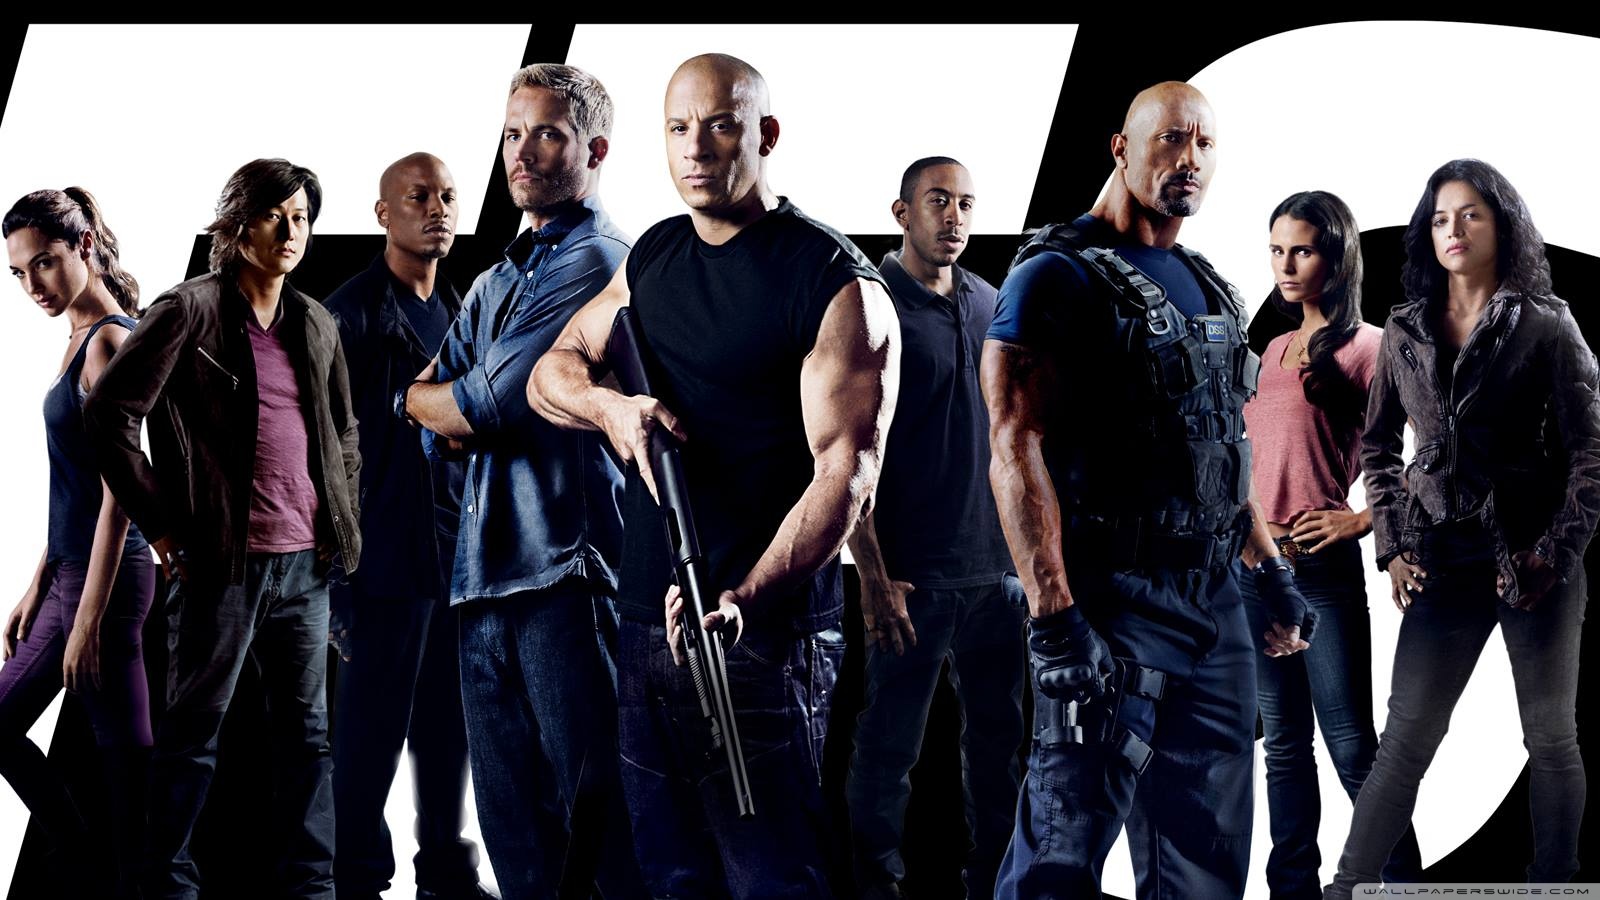  Furious 7 Movies Windows 8 and 10 themes and backgrounds Wallpapers